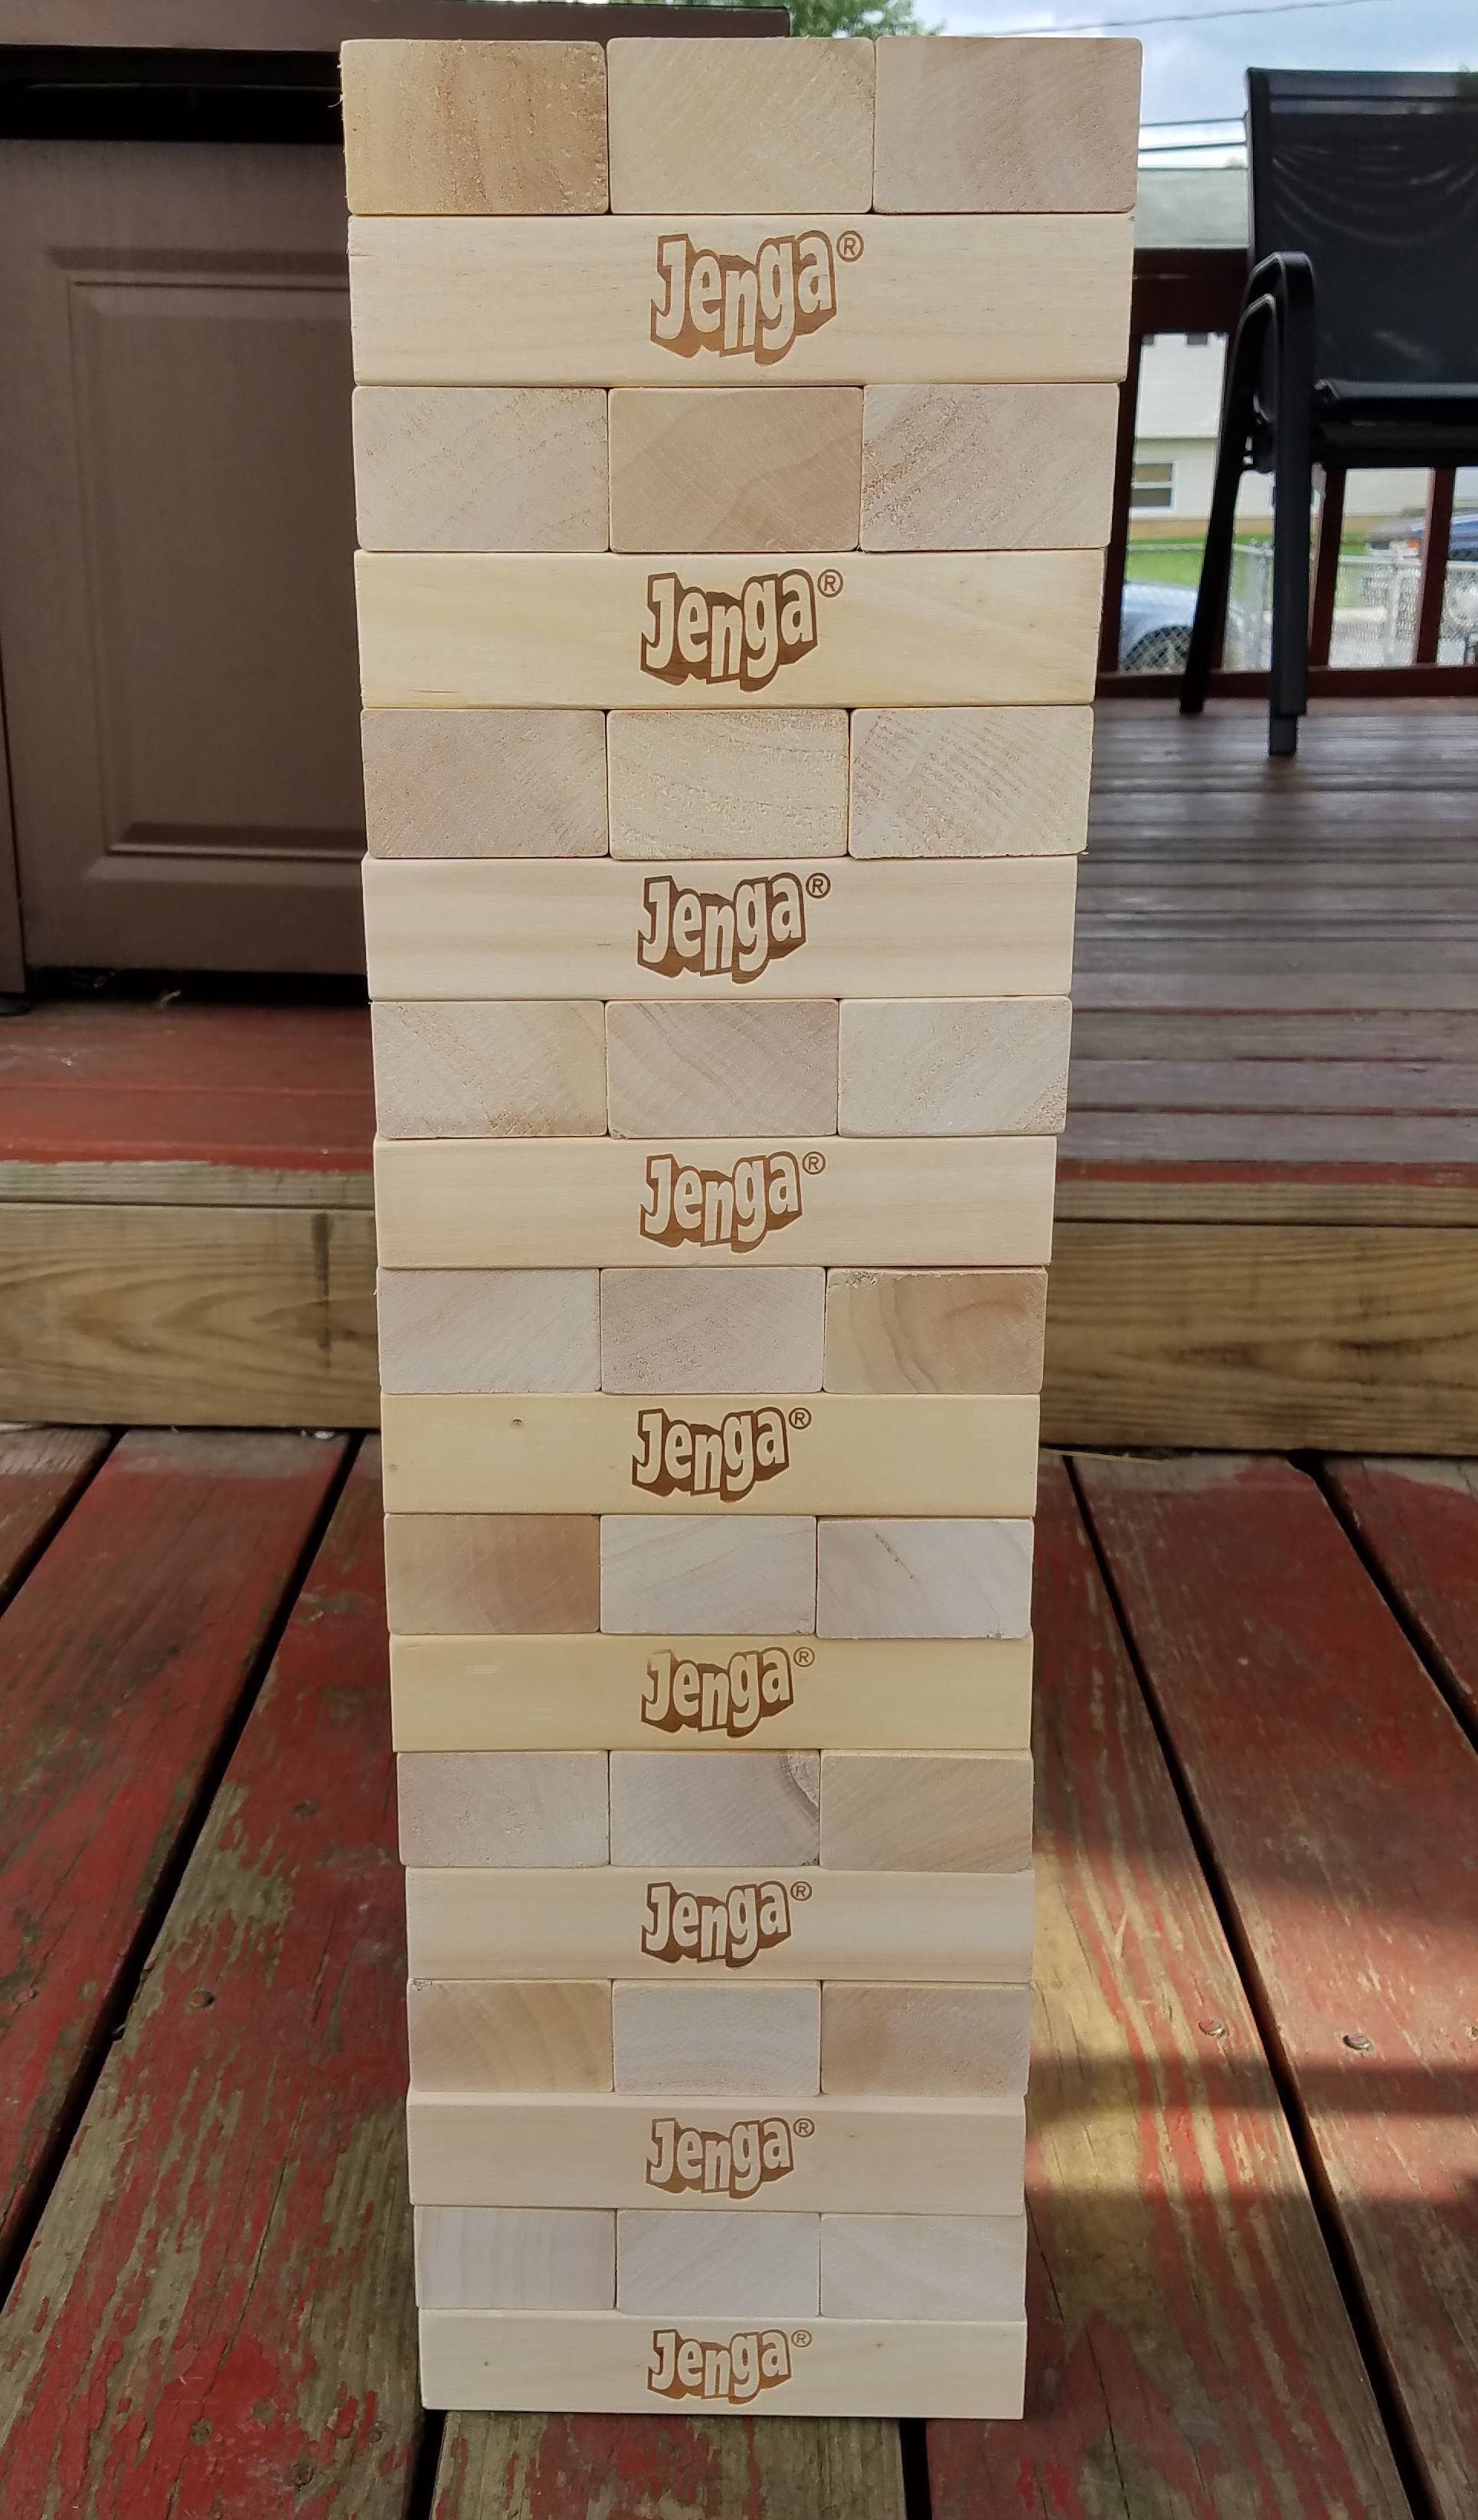 Jenga Giant - Stacks to Over 5 feet - Officially Licensed - JS7